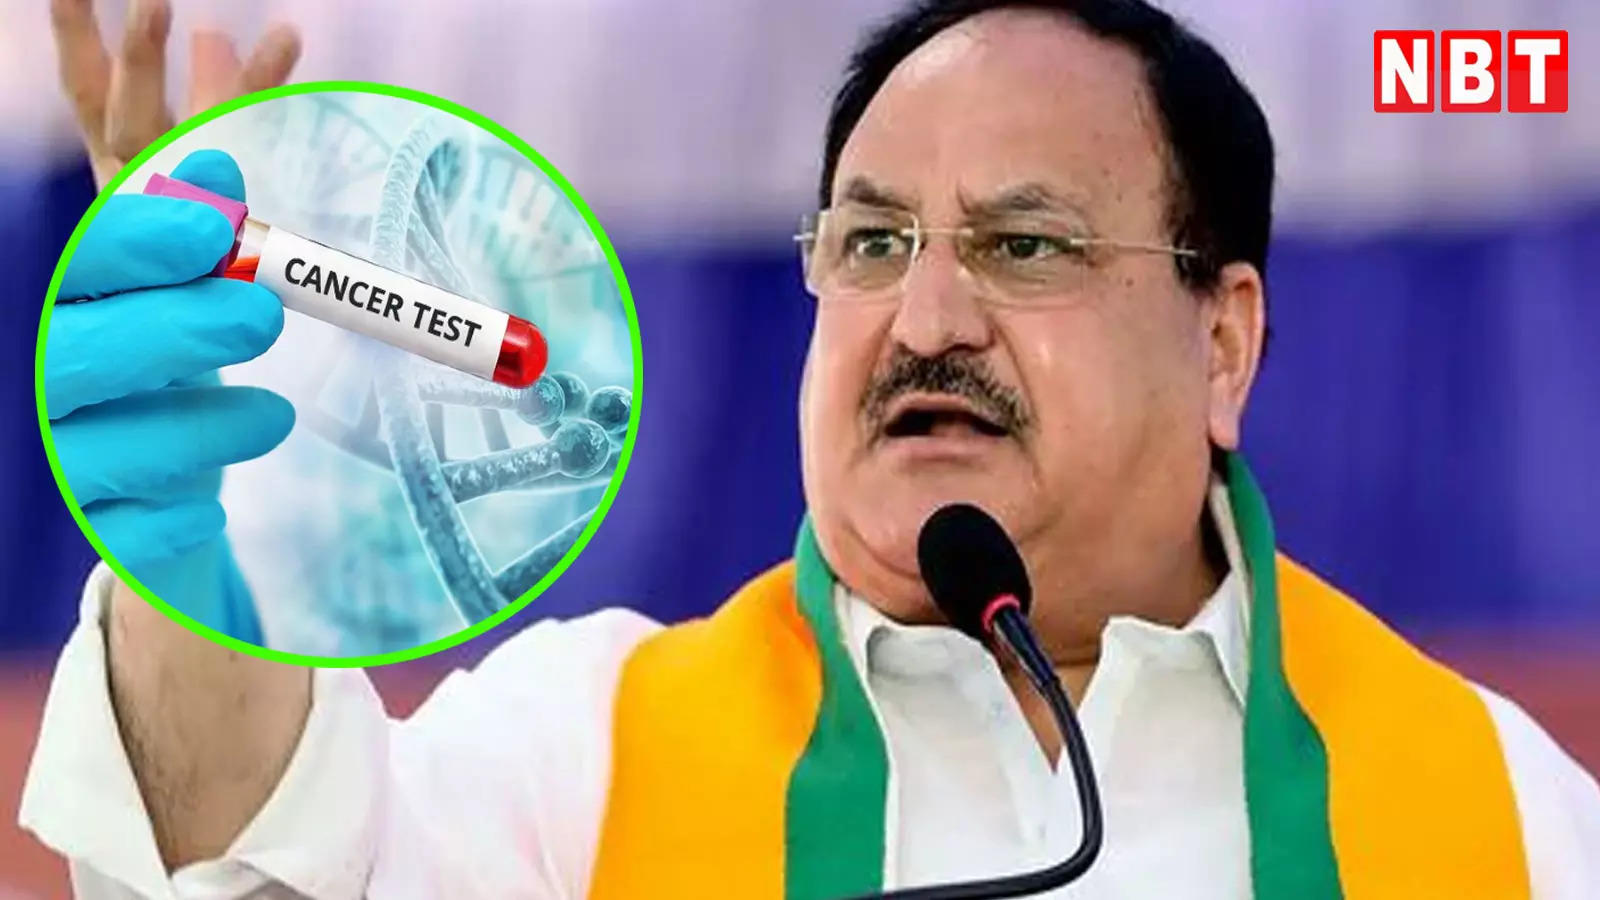 Why is treatment not free for all cancer patients in the country? Health Minister JP Nadda answered